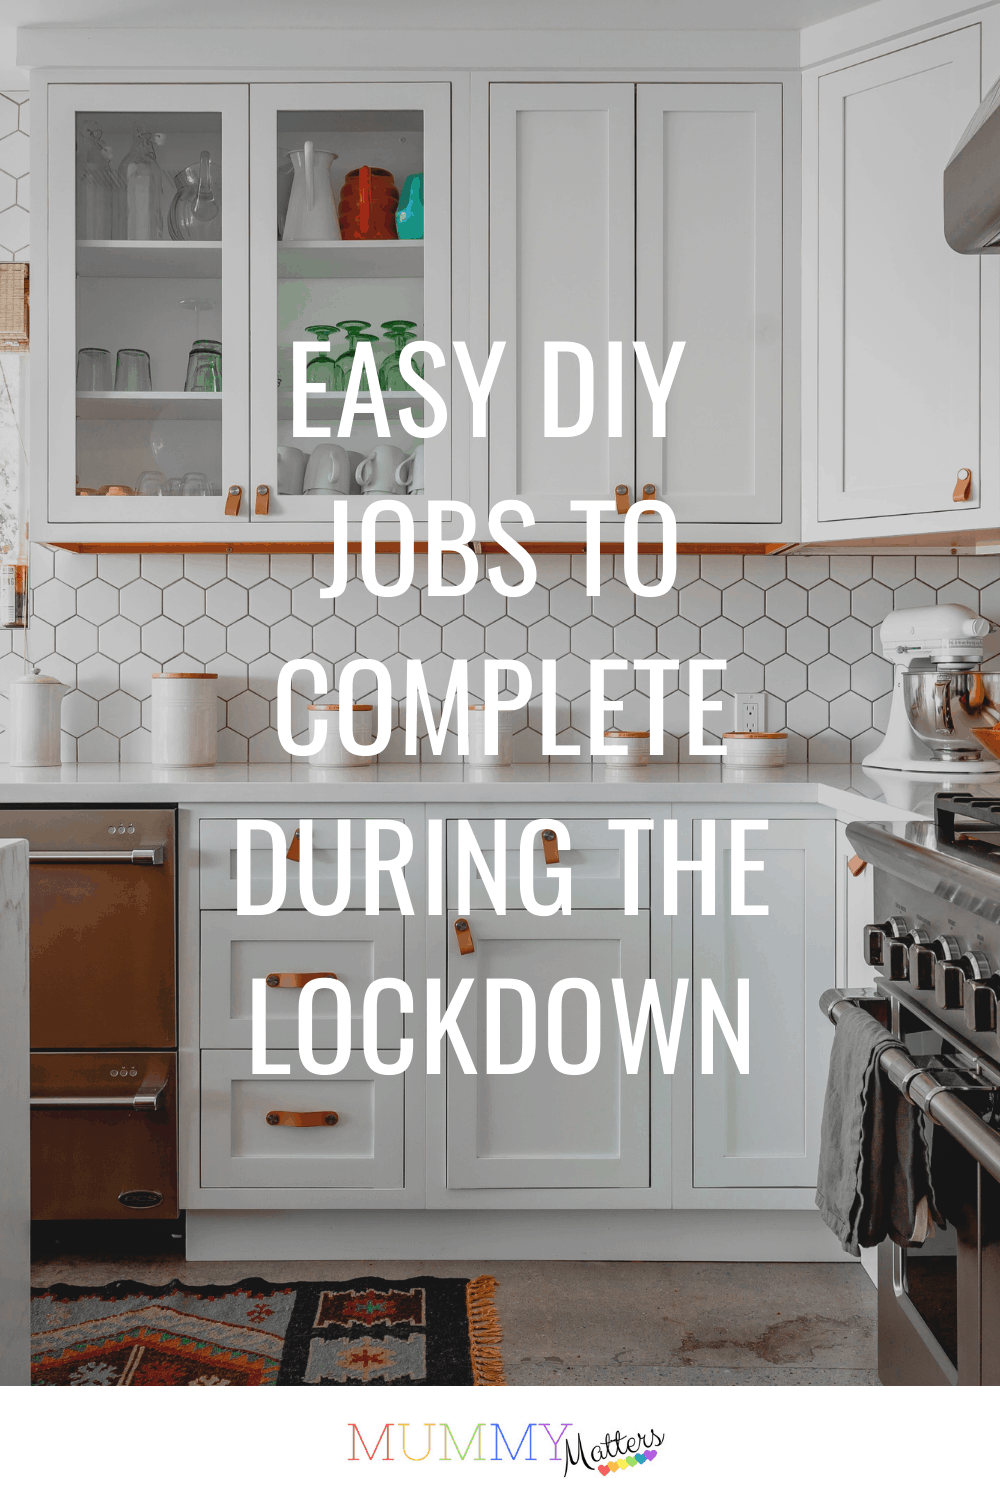 Have you been dreaming of having free time to do easy DIY jobs? Now is a perfect time! I’ve put together some easy projects to get you started.is